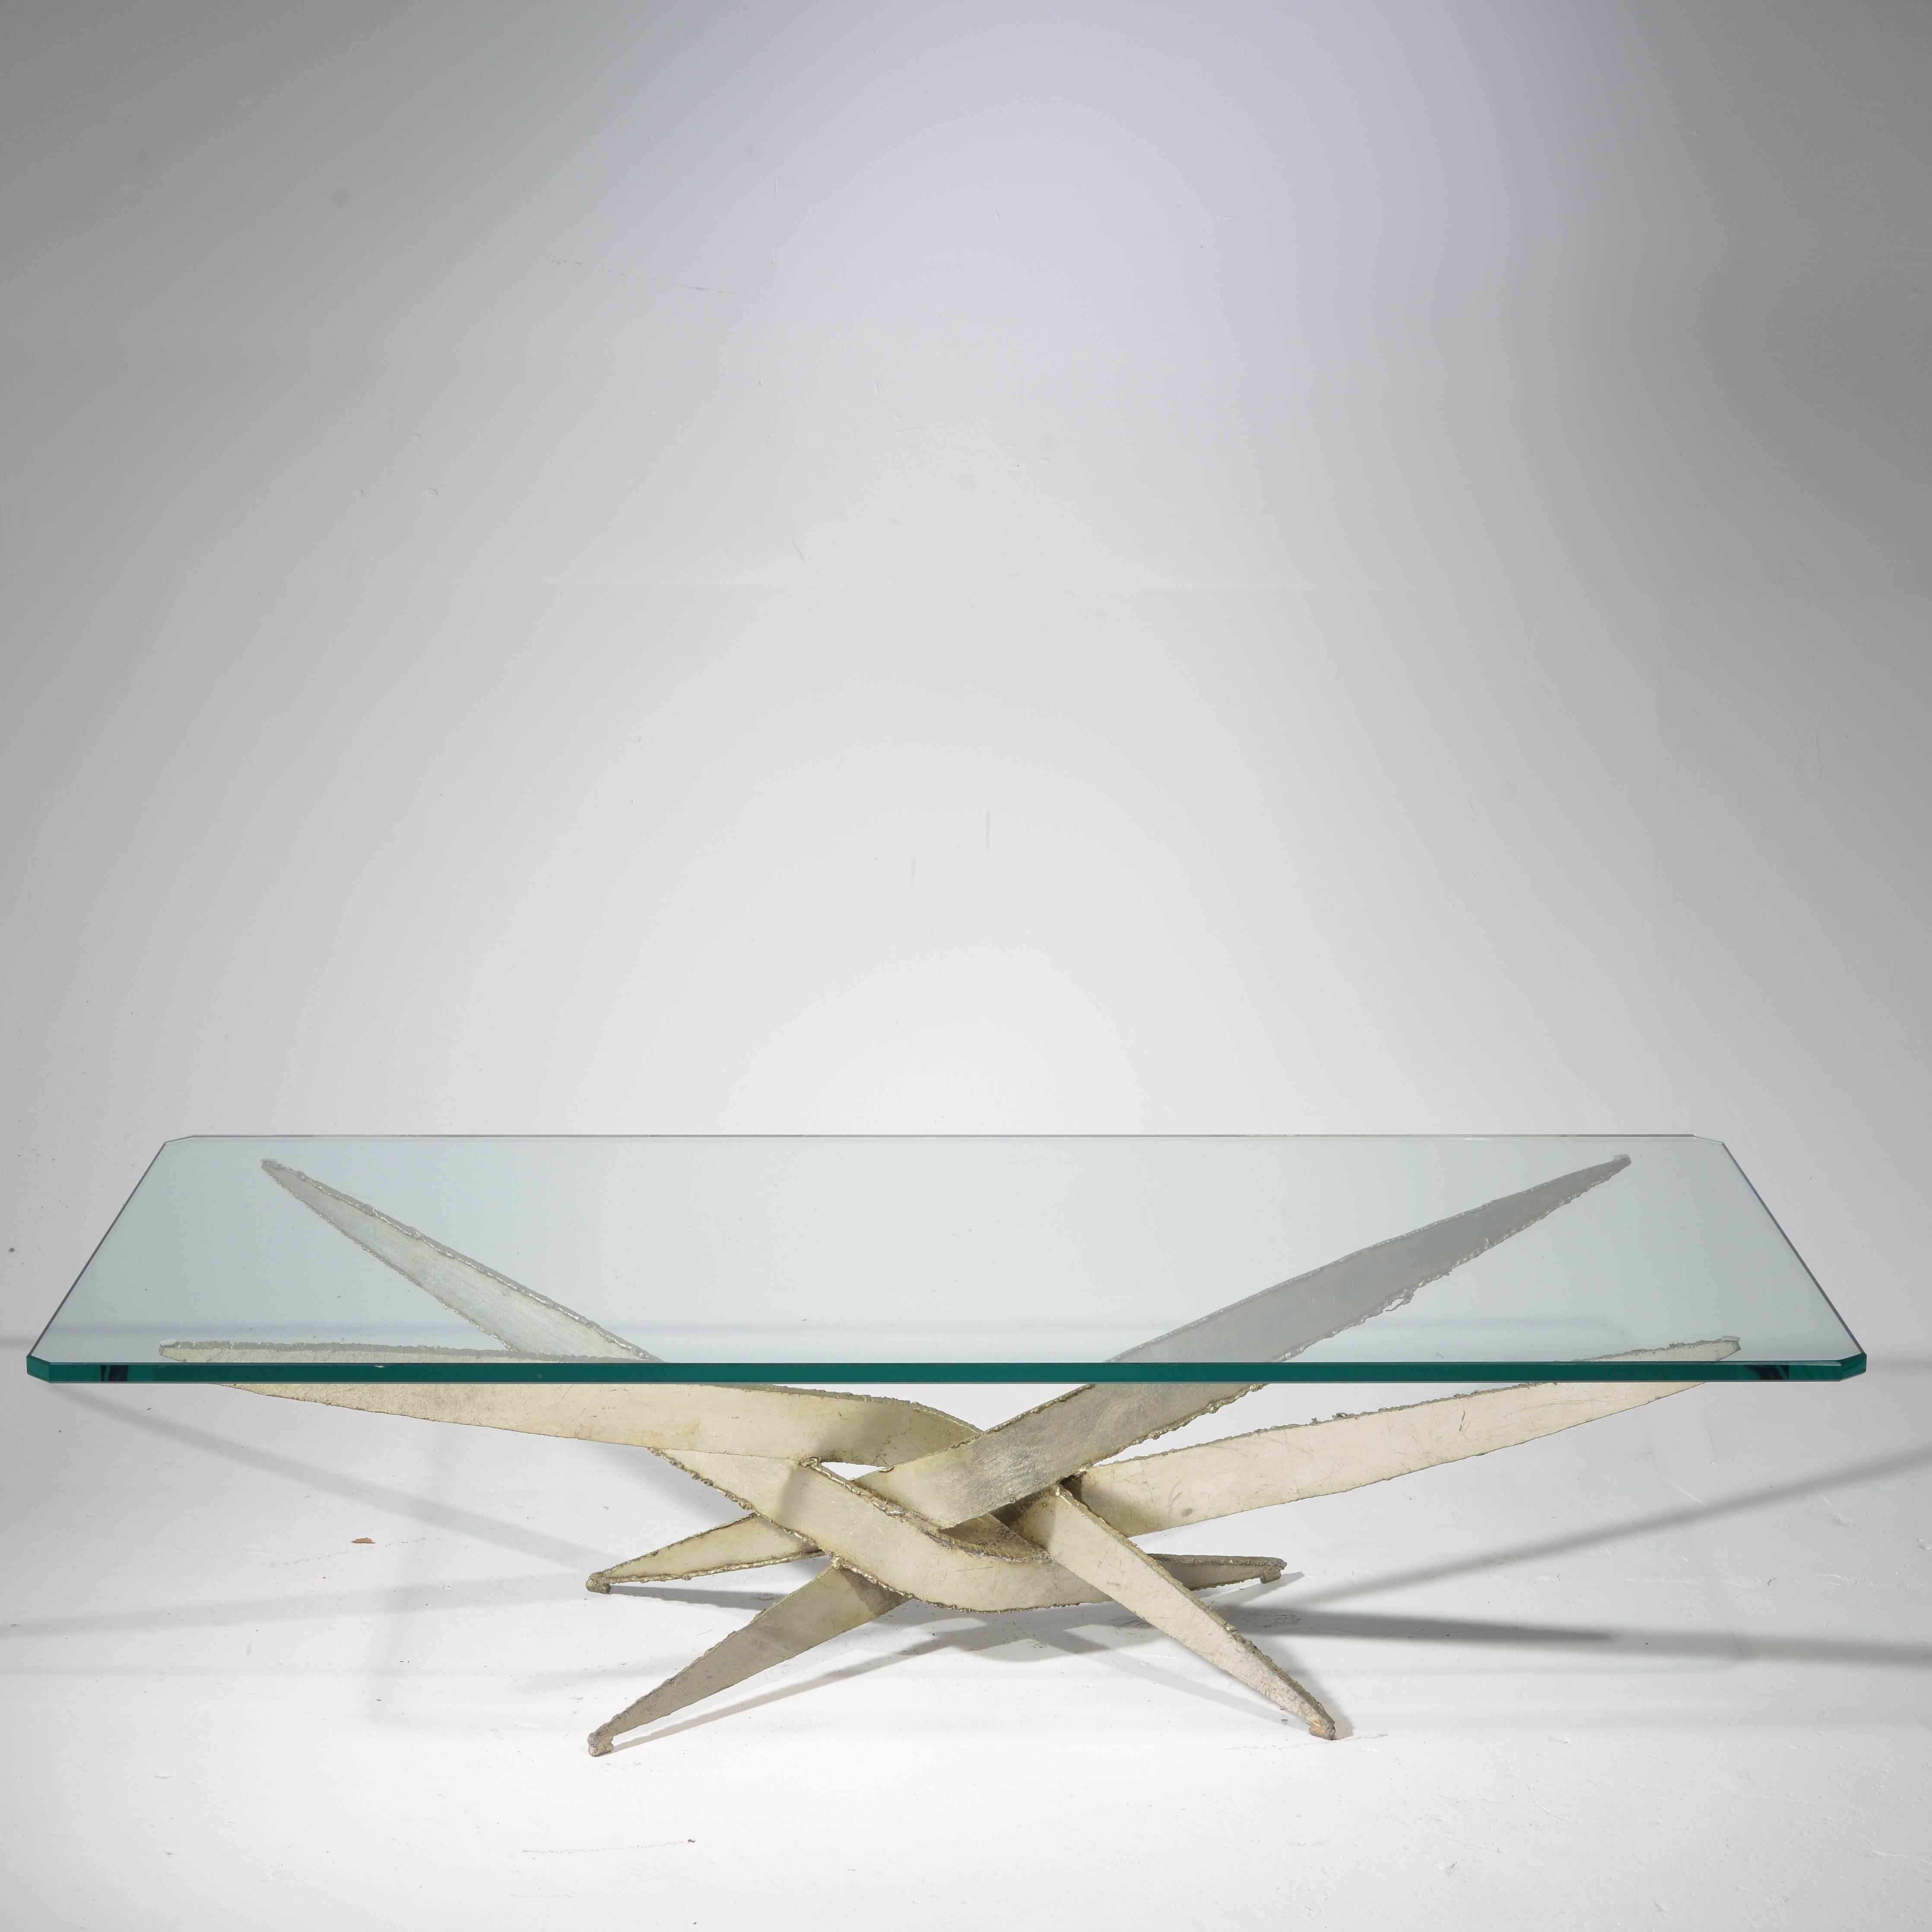 This is a beautifully sculpted large coffee table by Silas Seandel. Includes glass as shown.